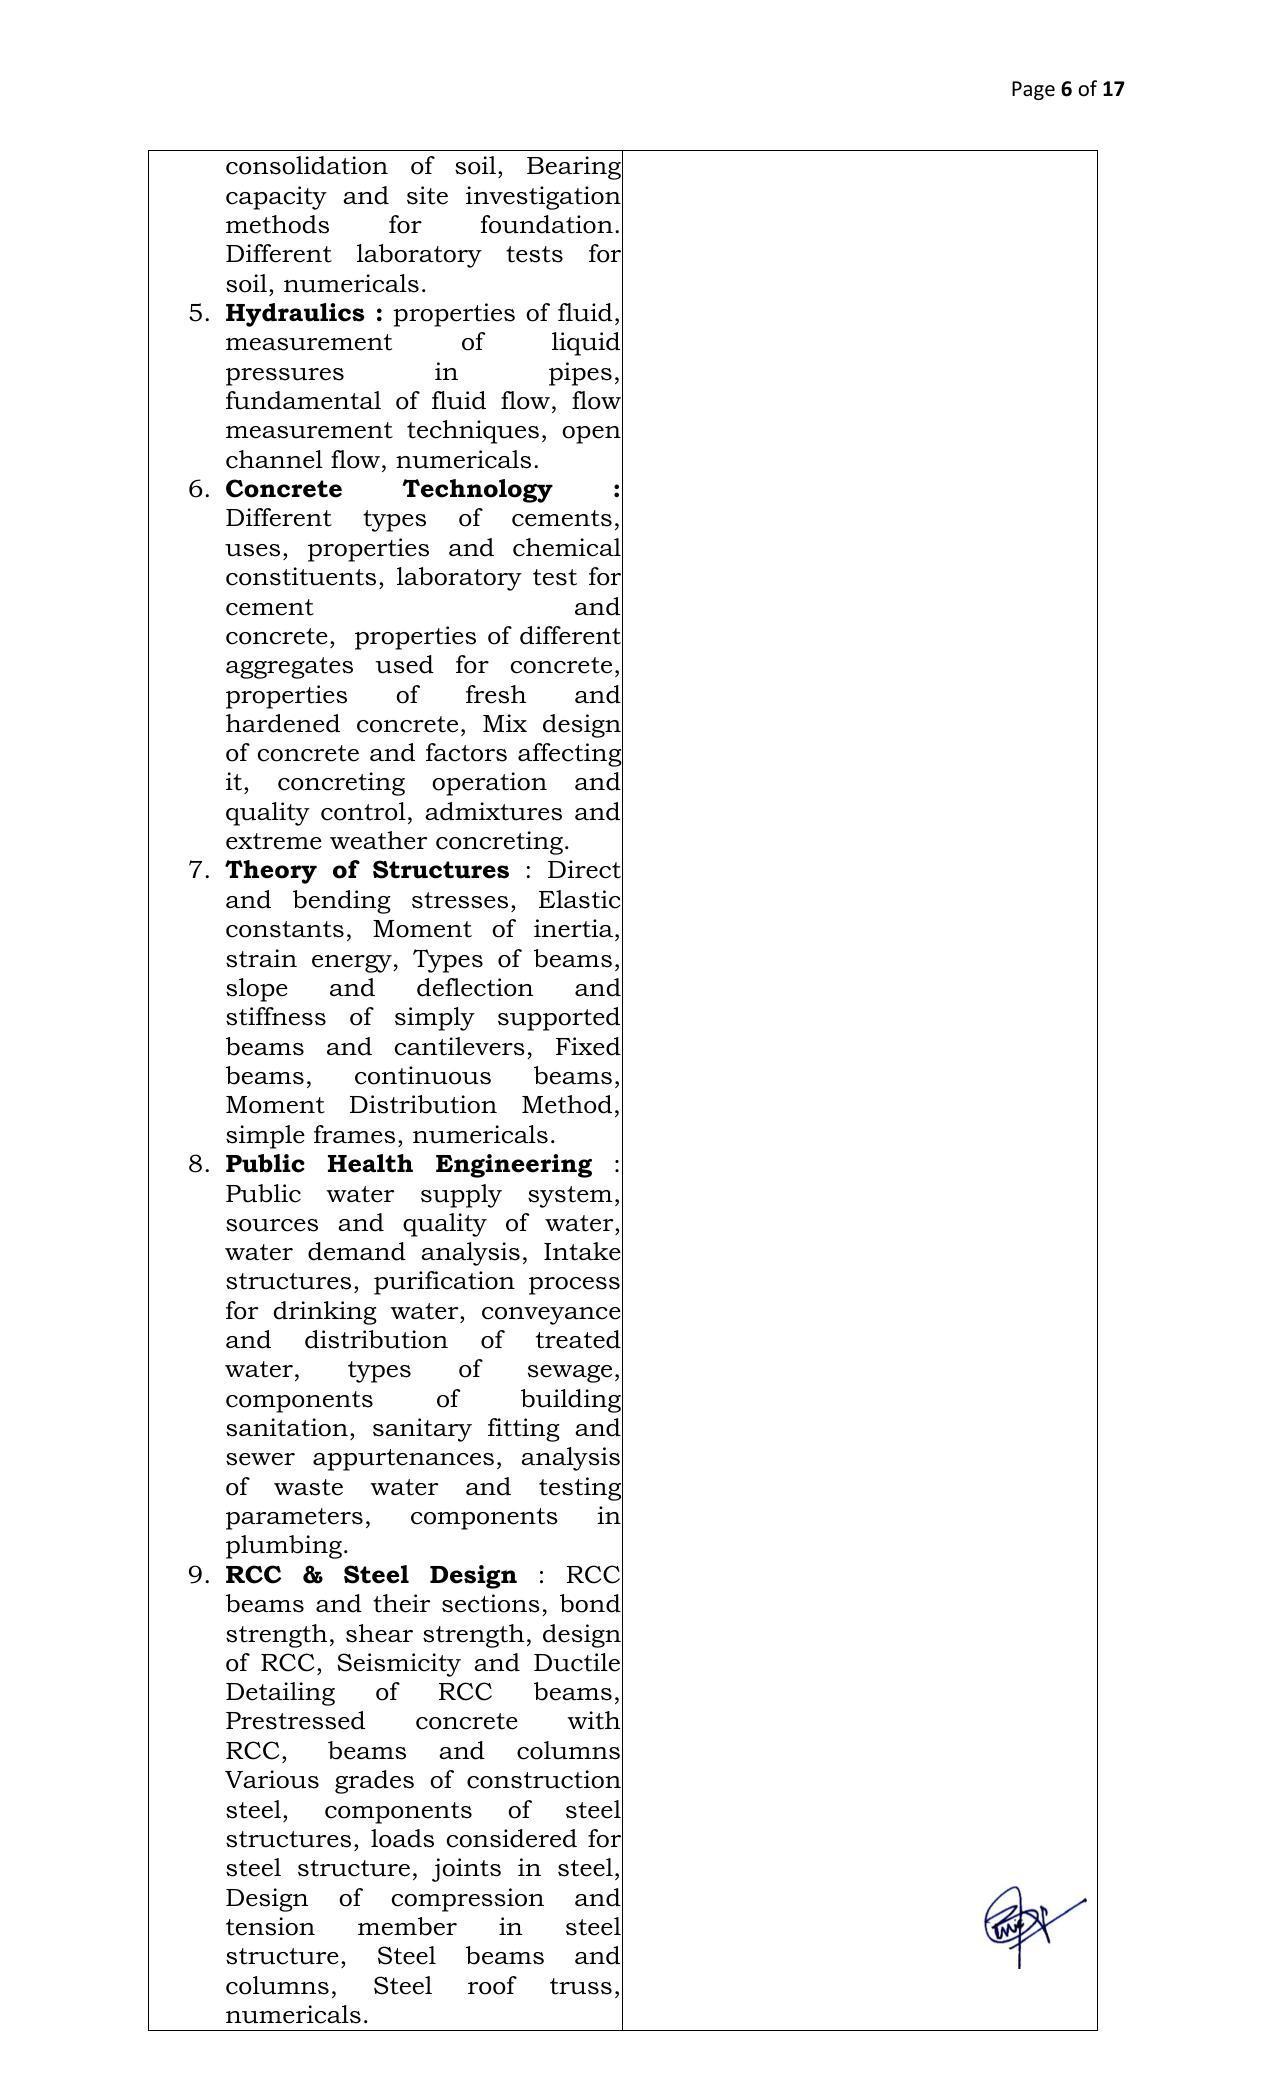 DBRAIT Invites Application for Lab Technician, Instructor Recruitment 2022 - Page 11